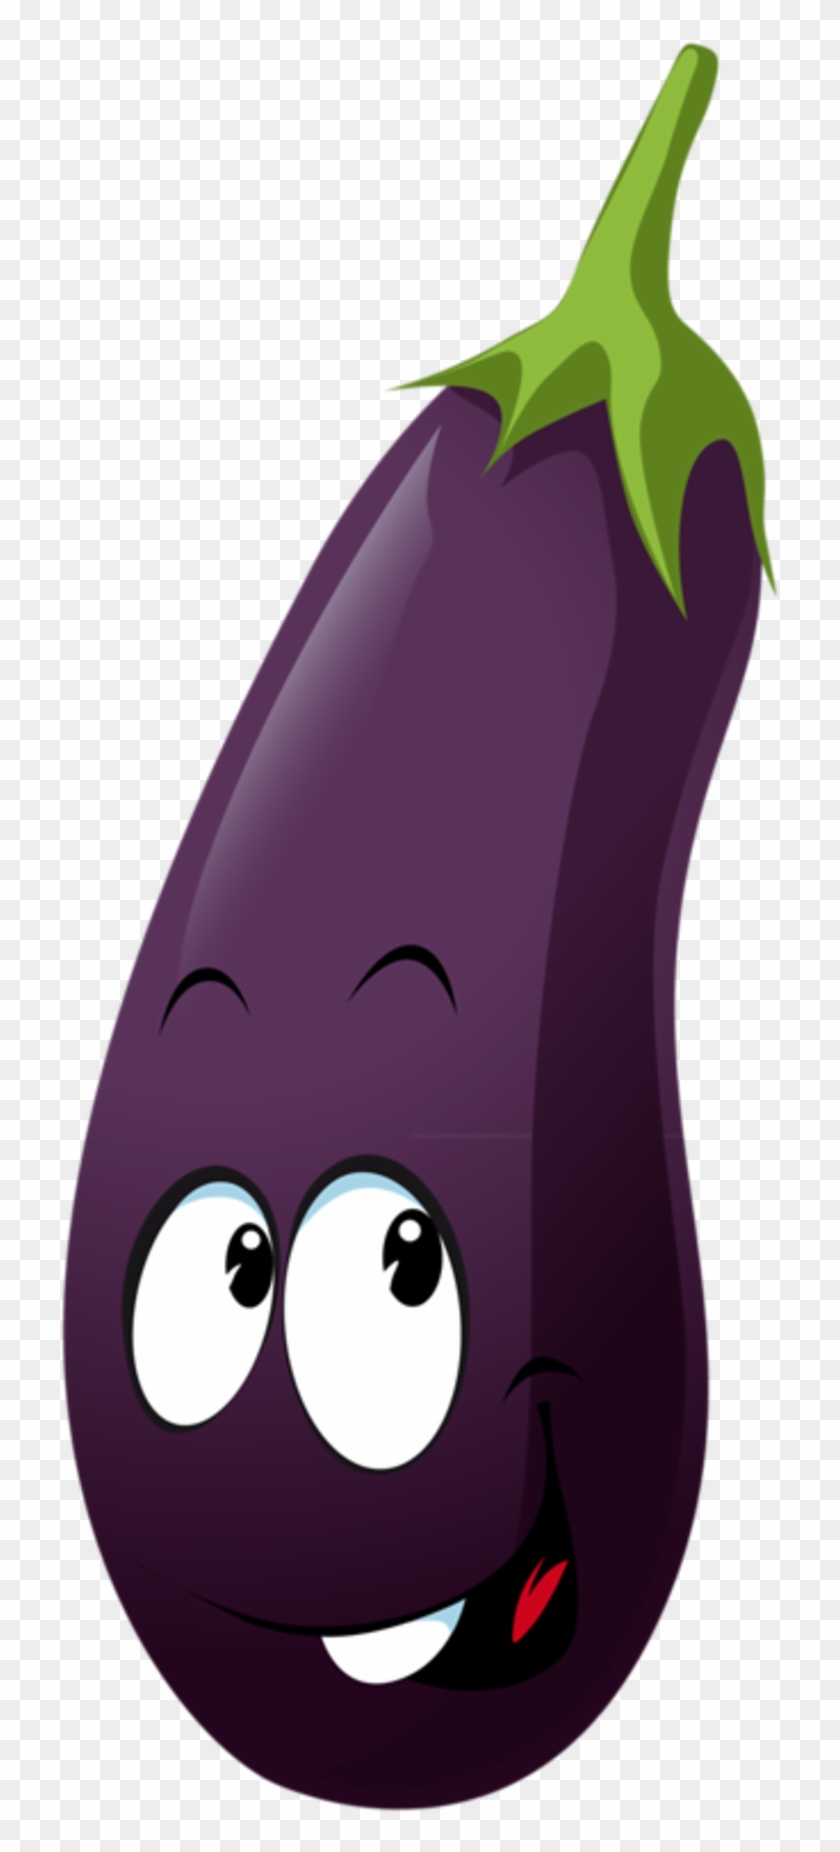 Download Svg Library Stock Individual Vegetable Free On - Eggplant ...